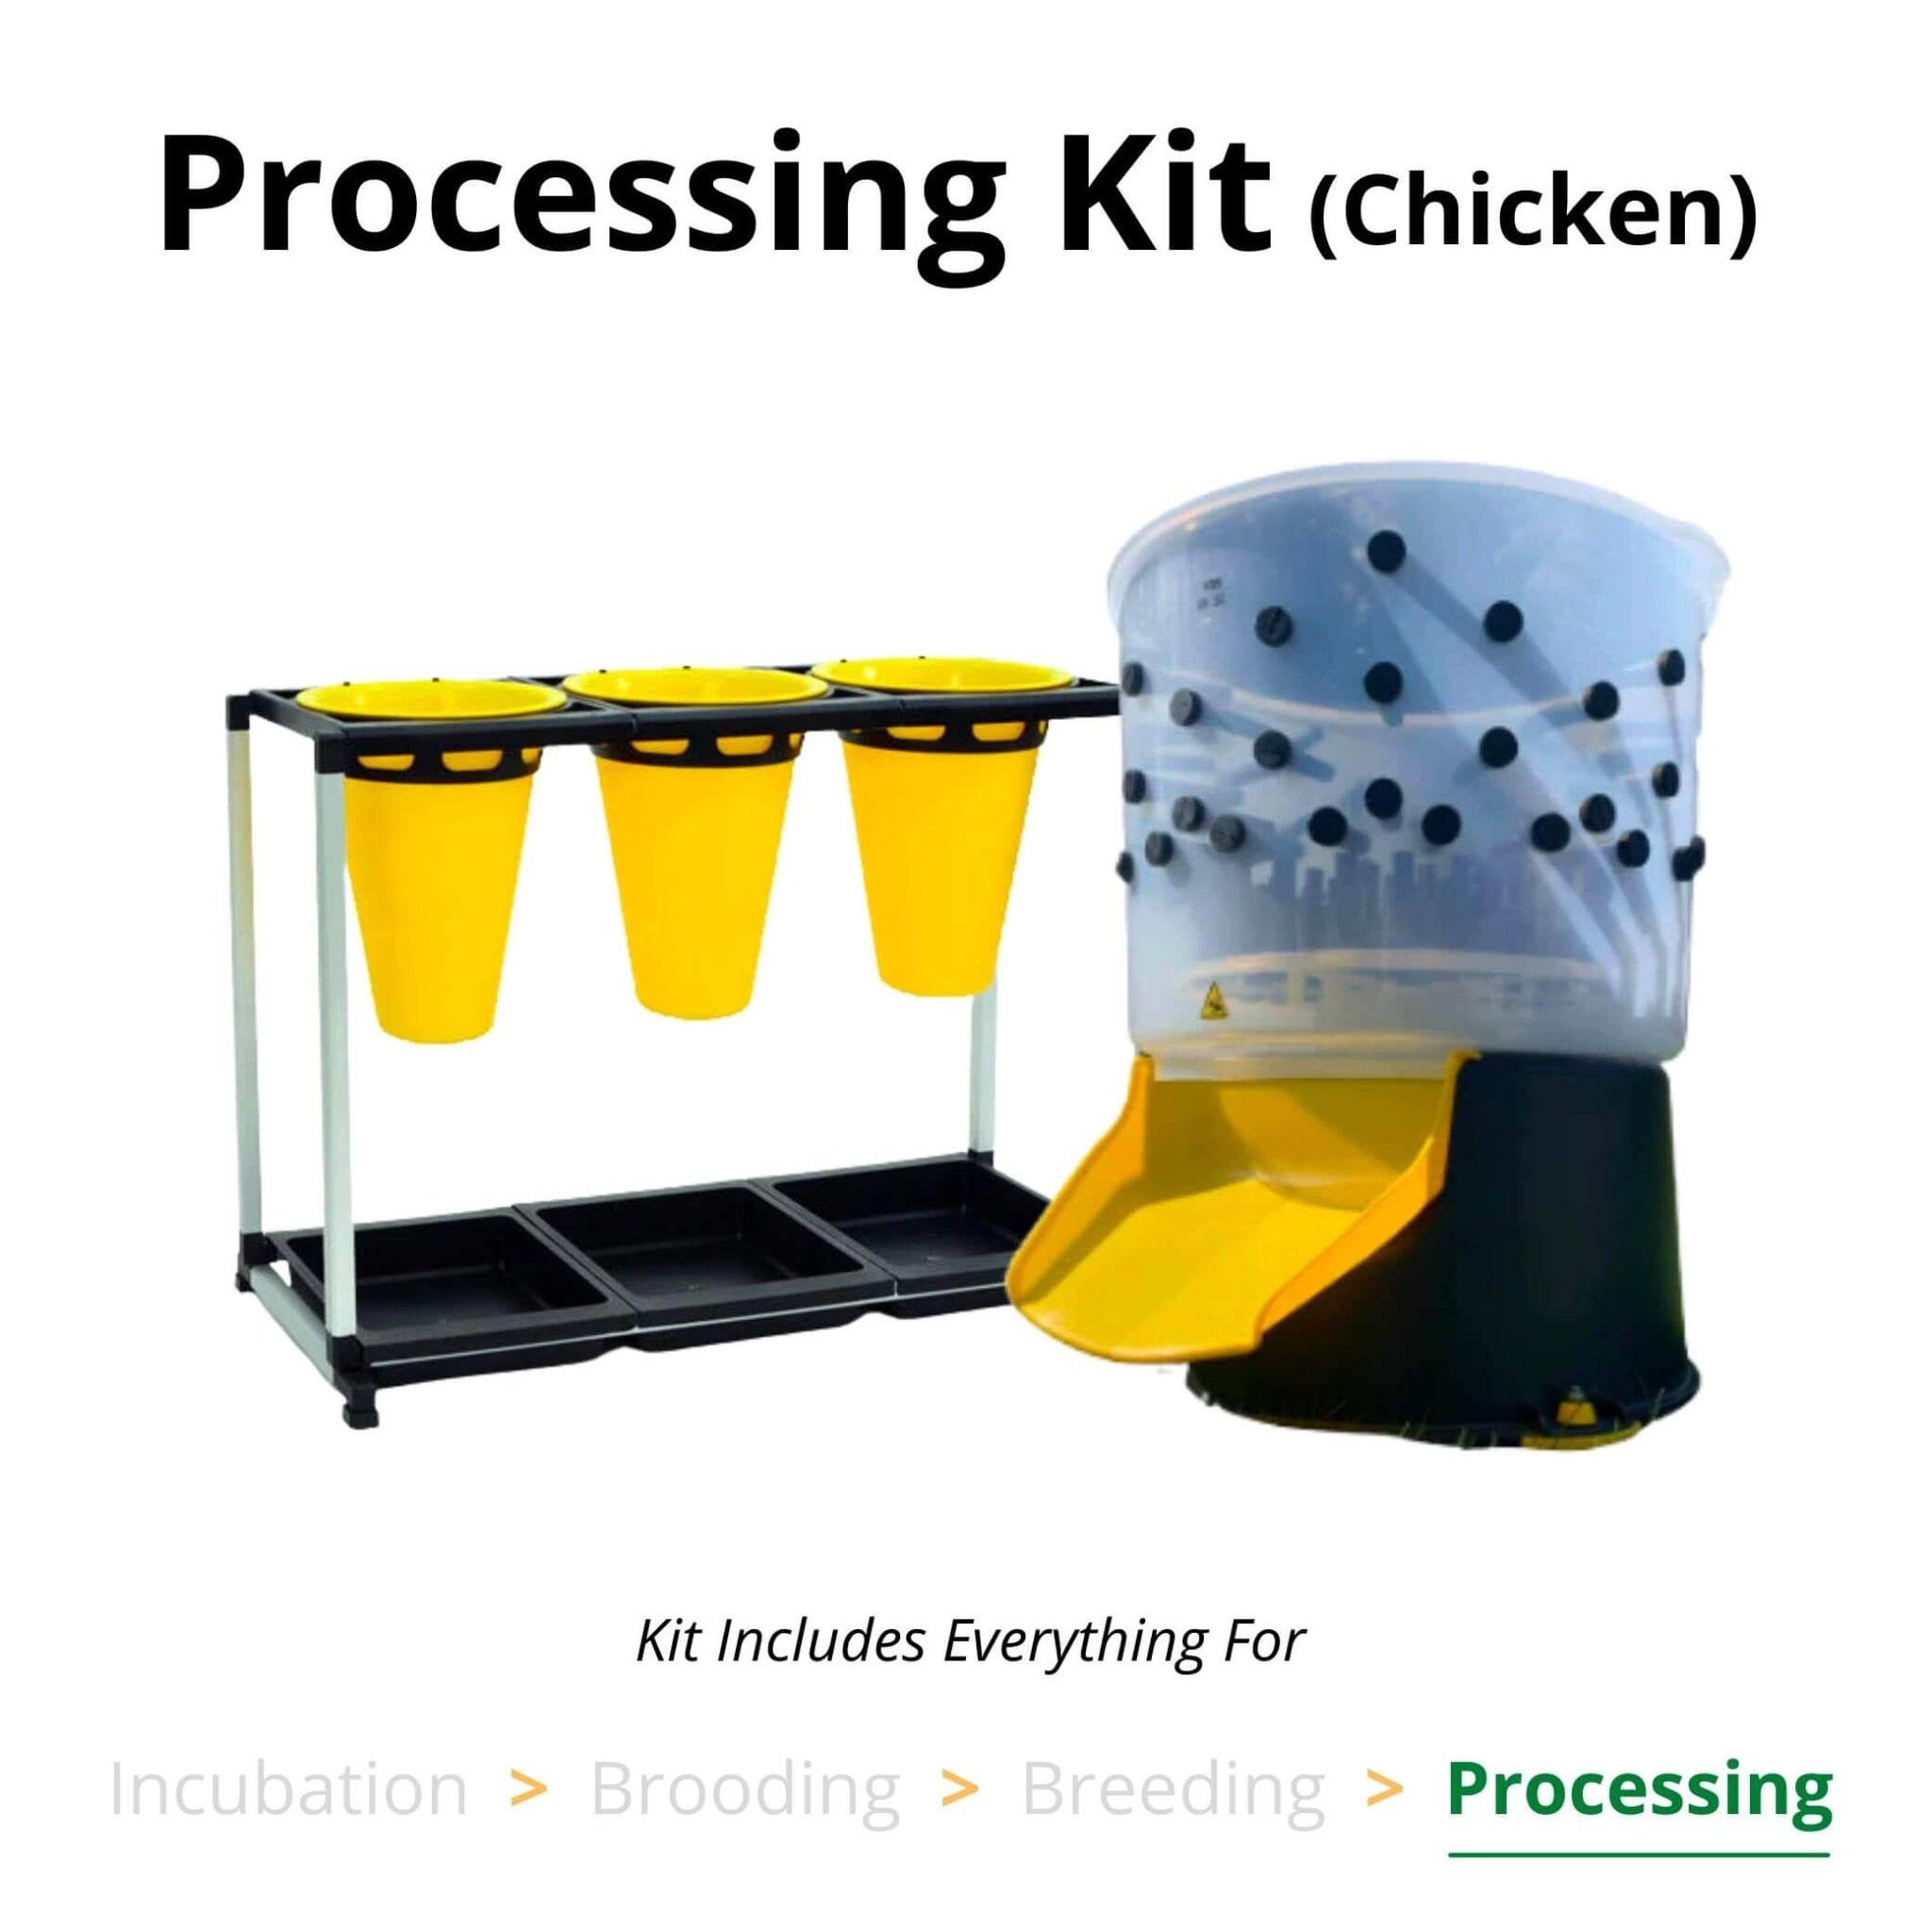 Hatching Time Cimuka. Image shows a processing kit for chickens. 3 kill cones can be seen next to a feather plucker. Image text reads “Kit includes everything for Processing”